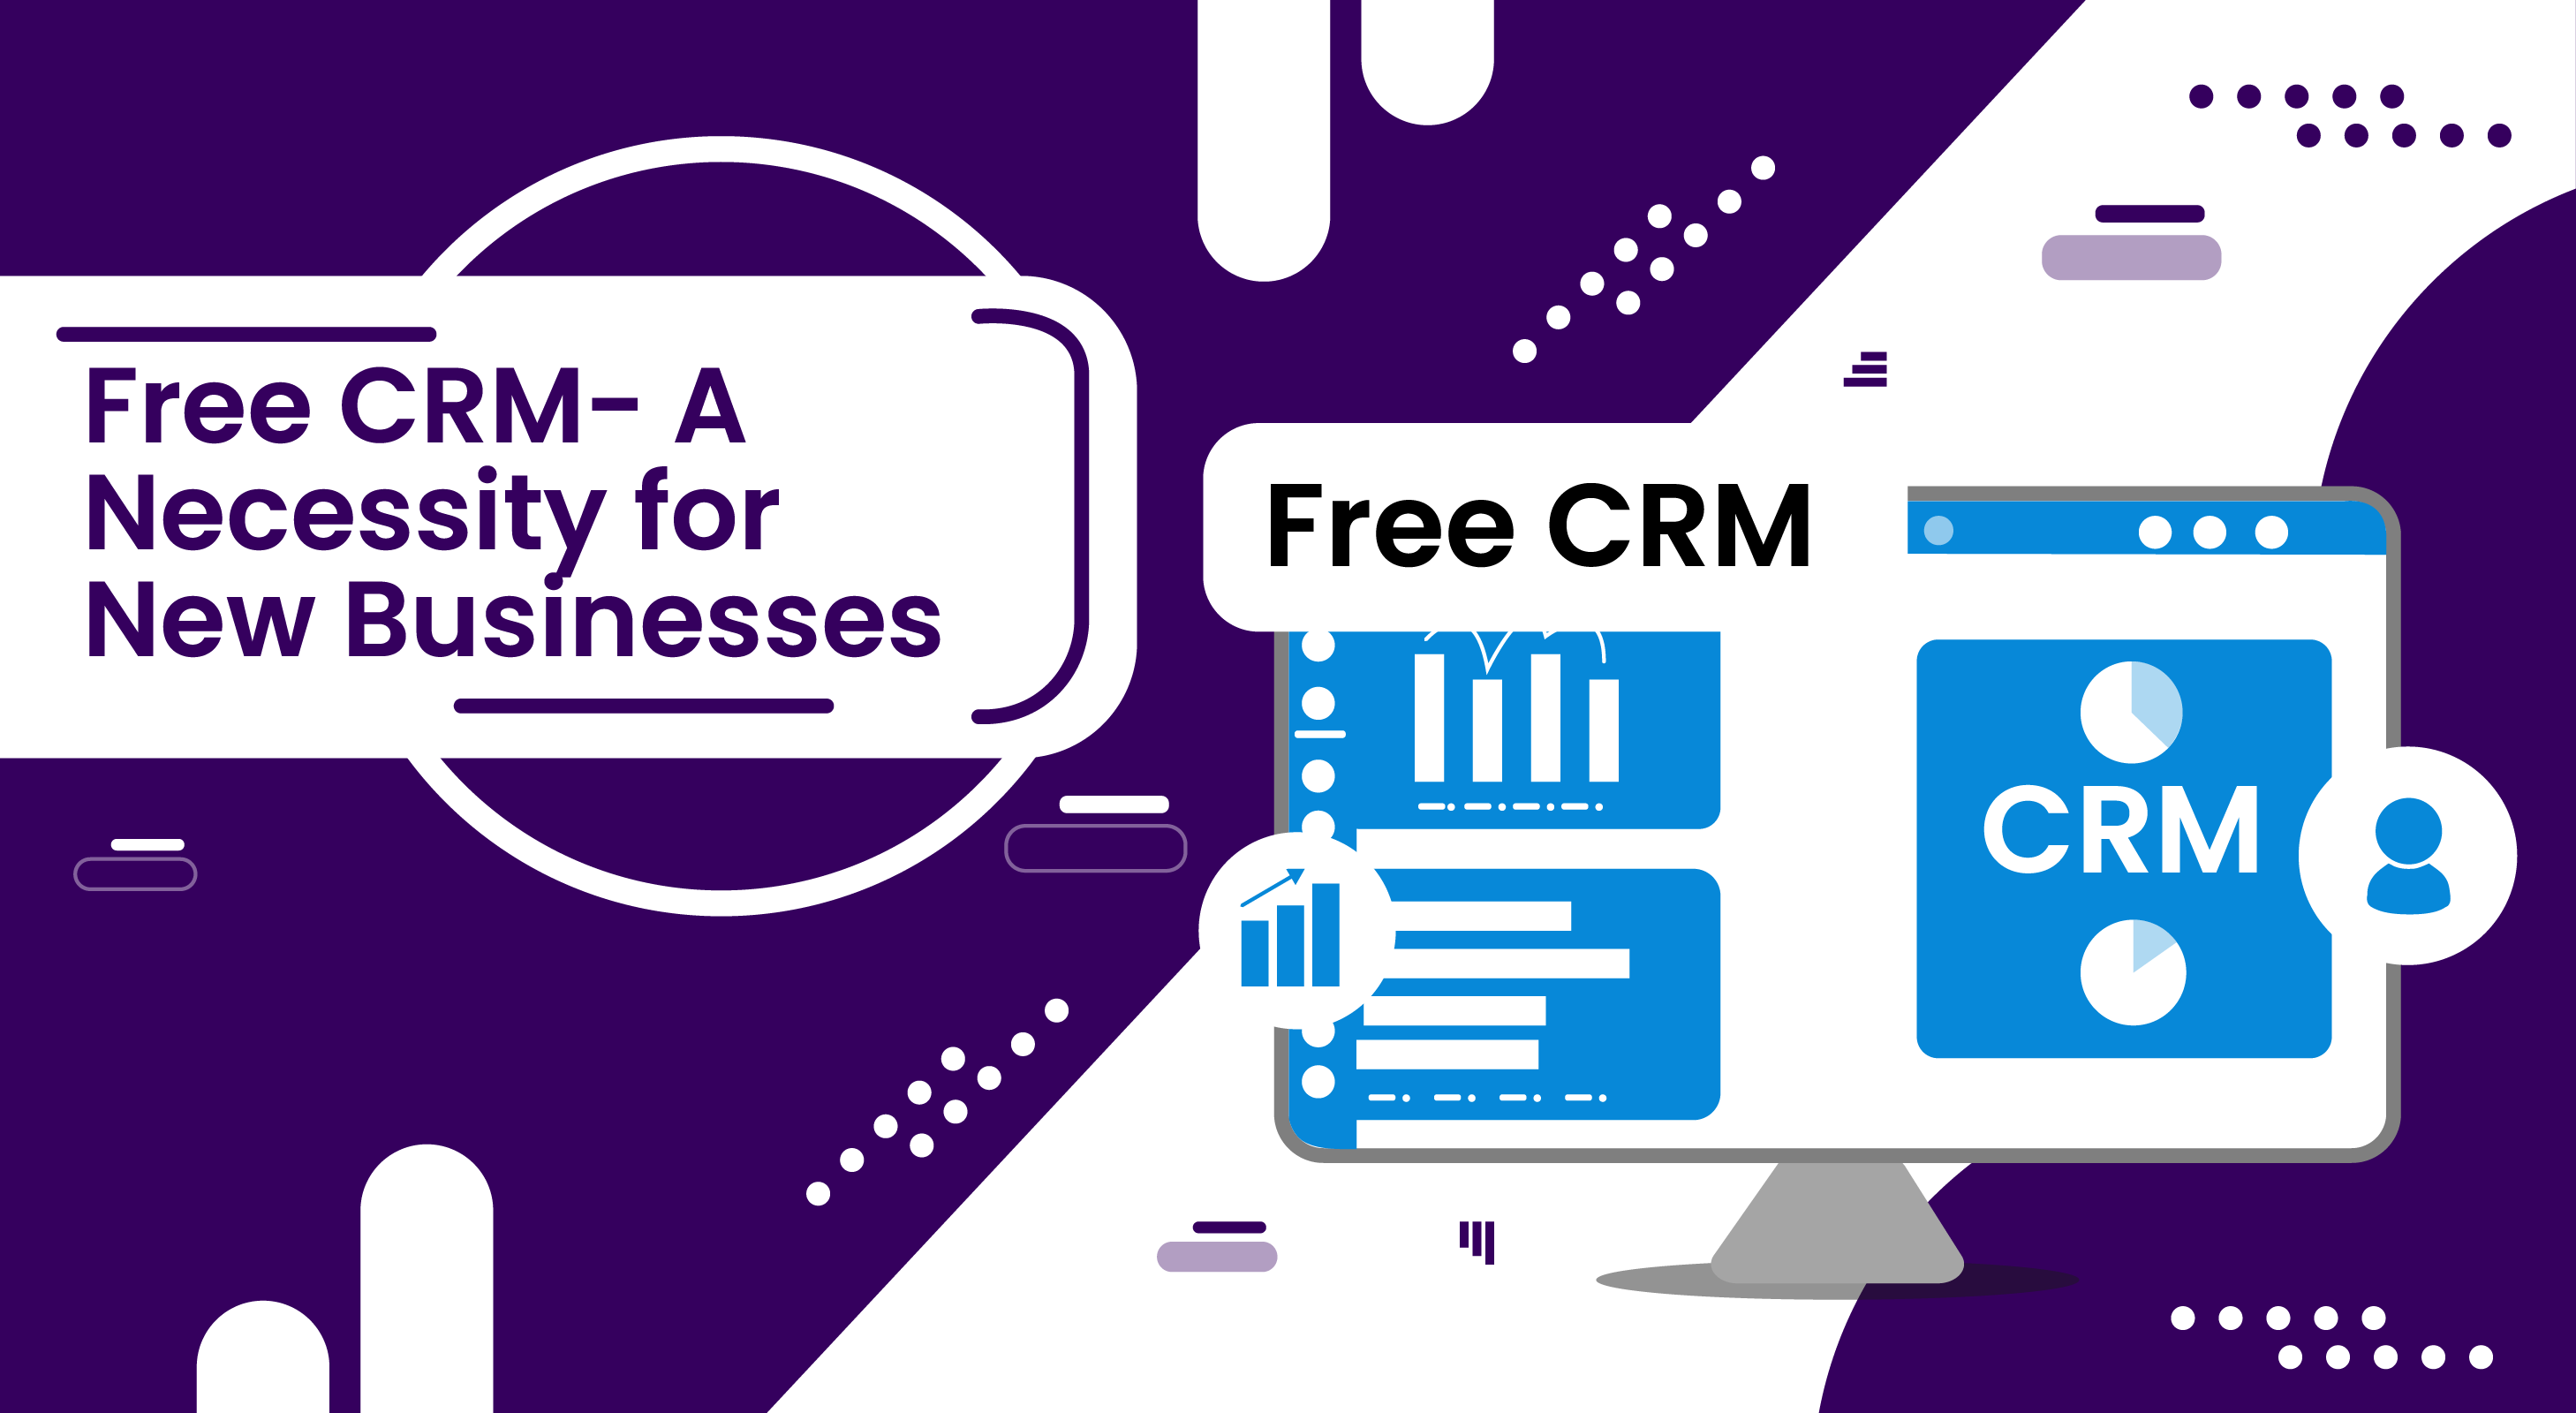 Free CRM – Why Do Small Businesses Need To Have It?